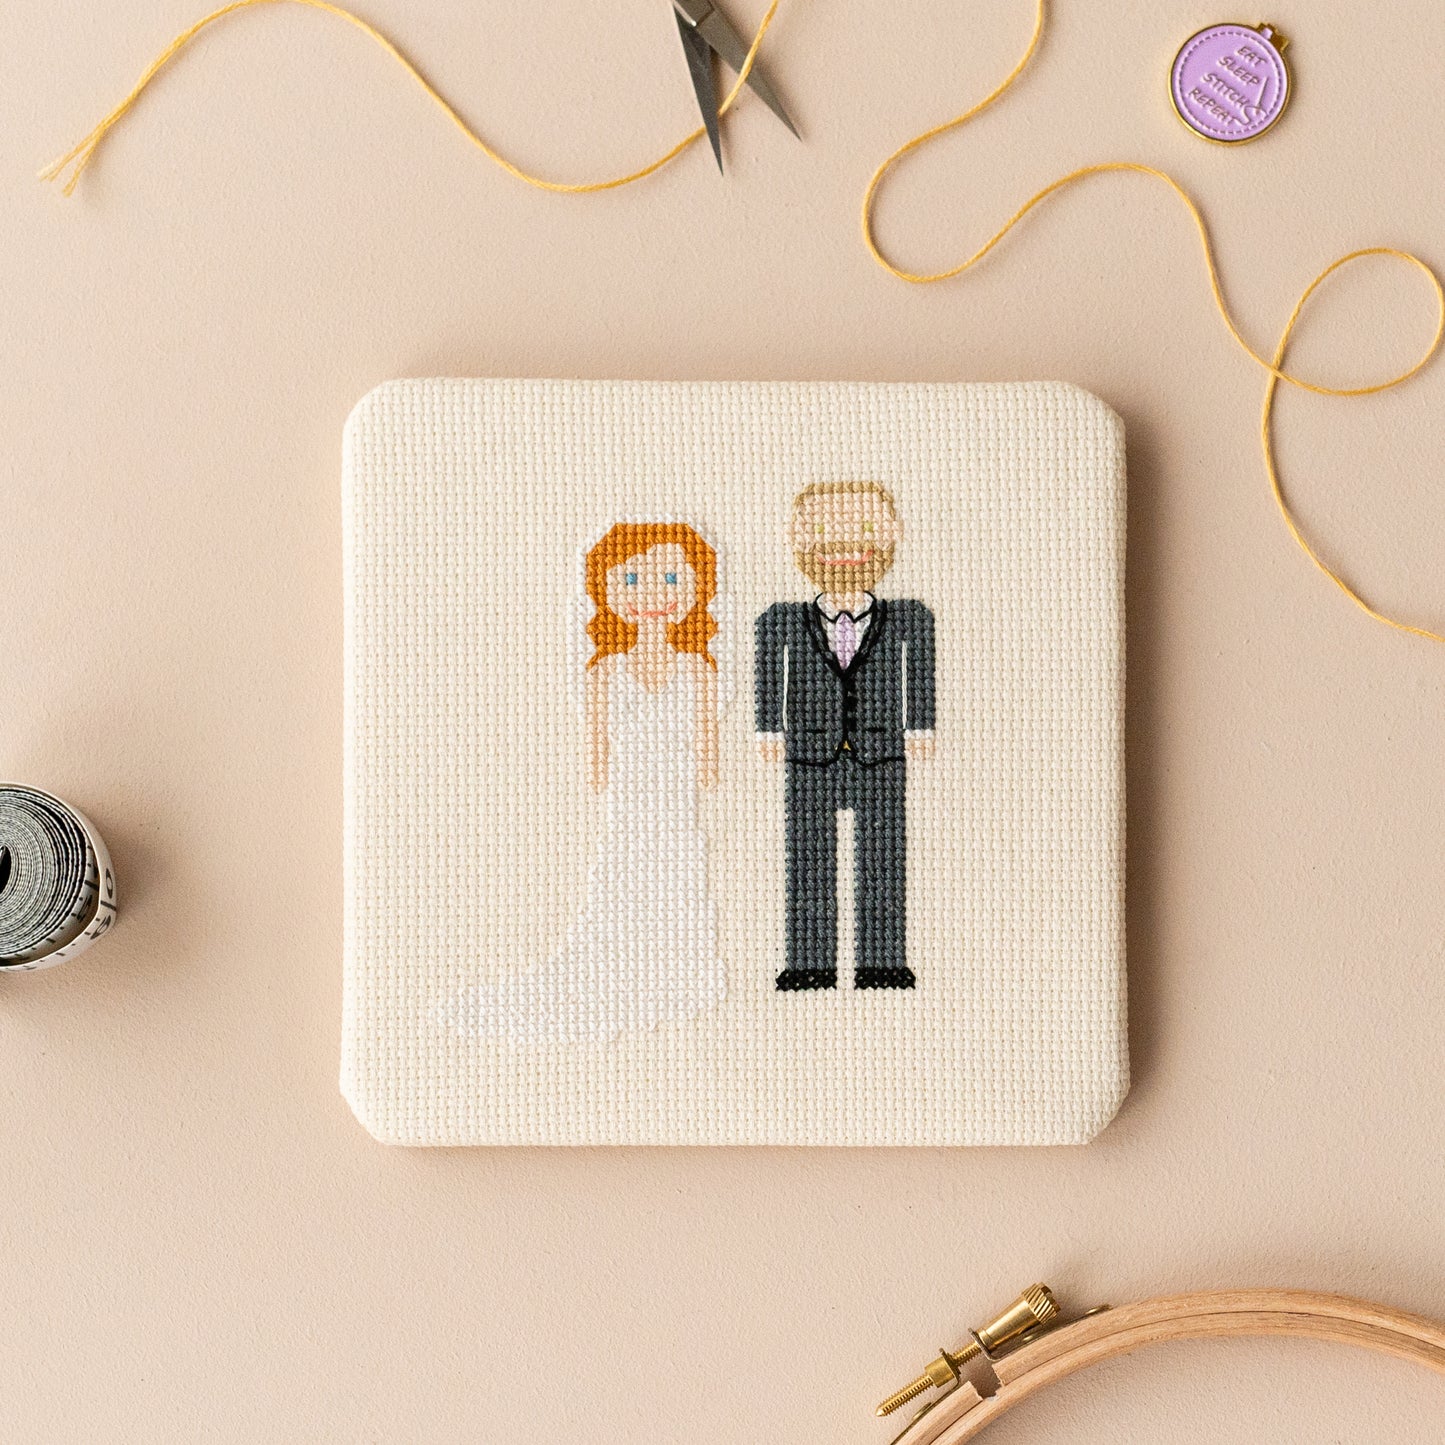 Melocharacters: The Wedding Edition Cross Stitch Kit